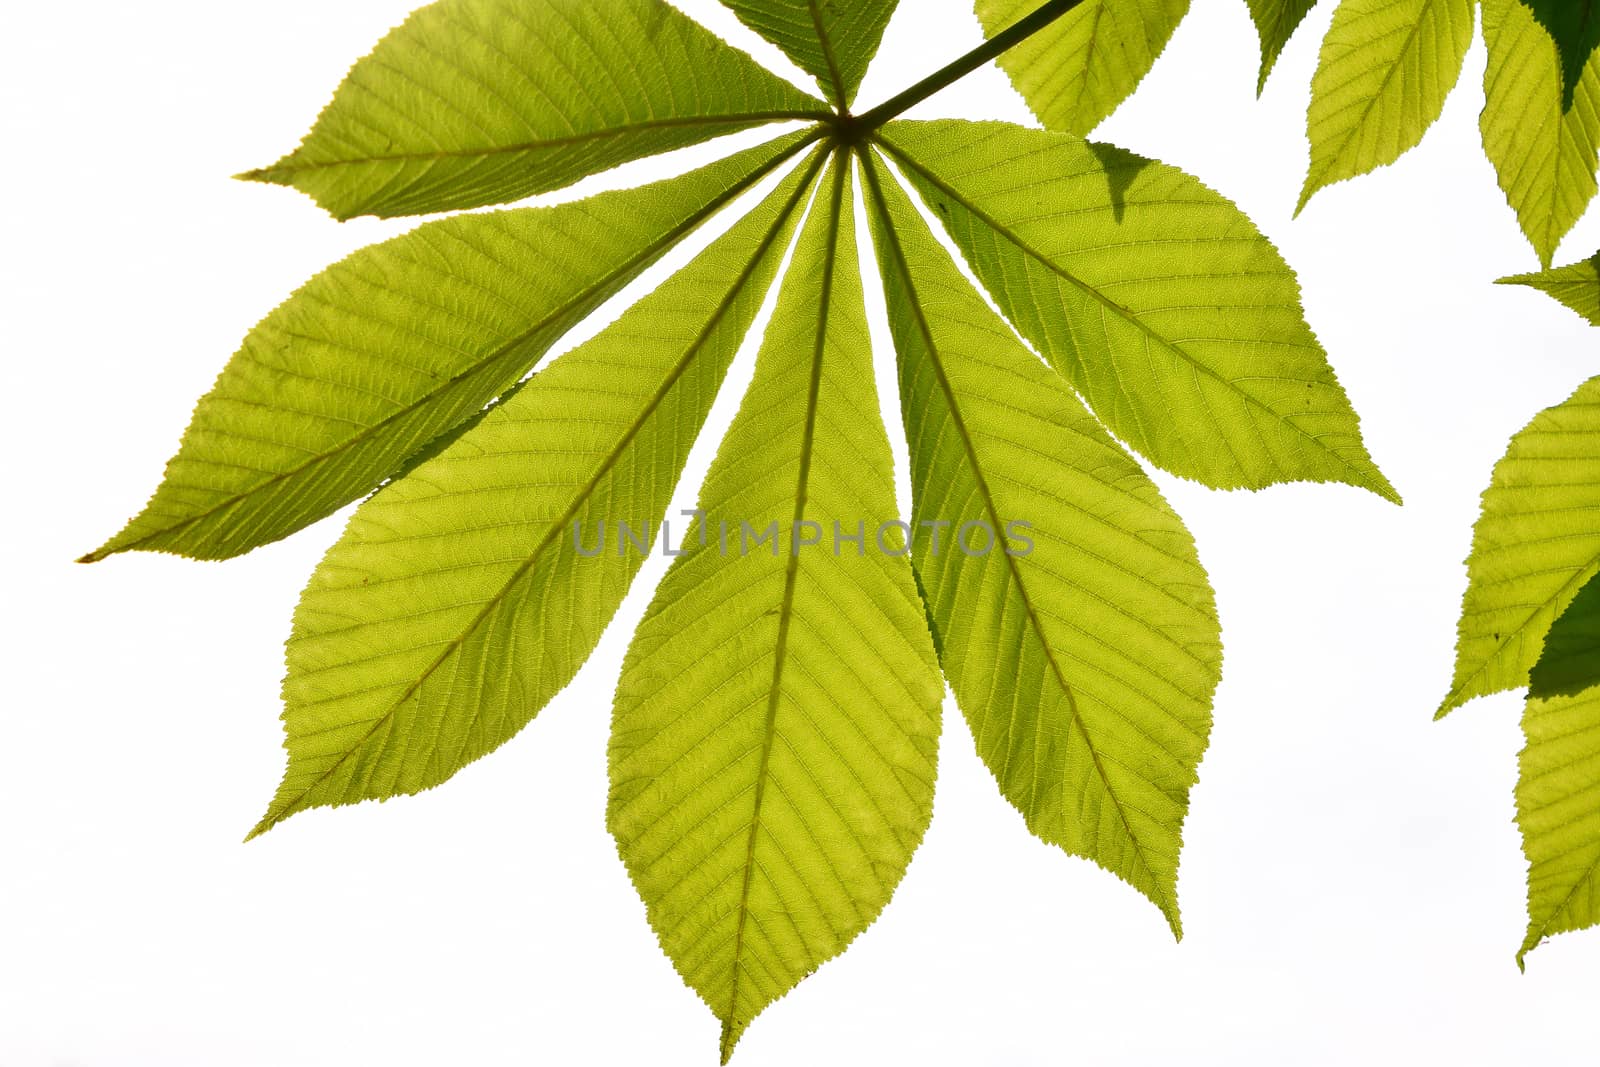 Translucent horse chestnut textured green leaves in back lightin by BreakingTheWalls